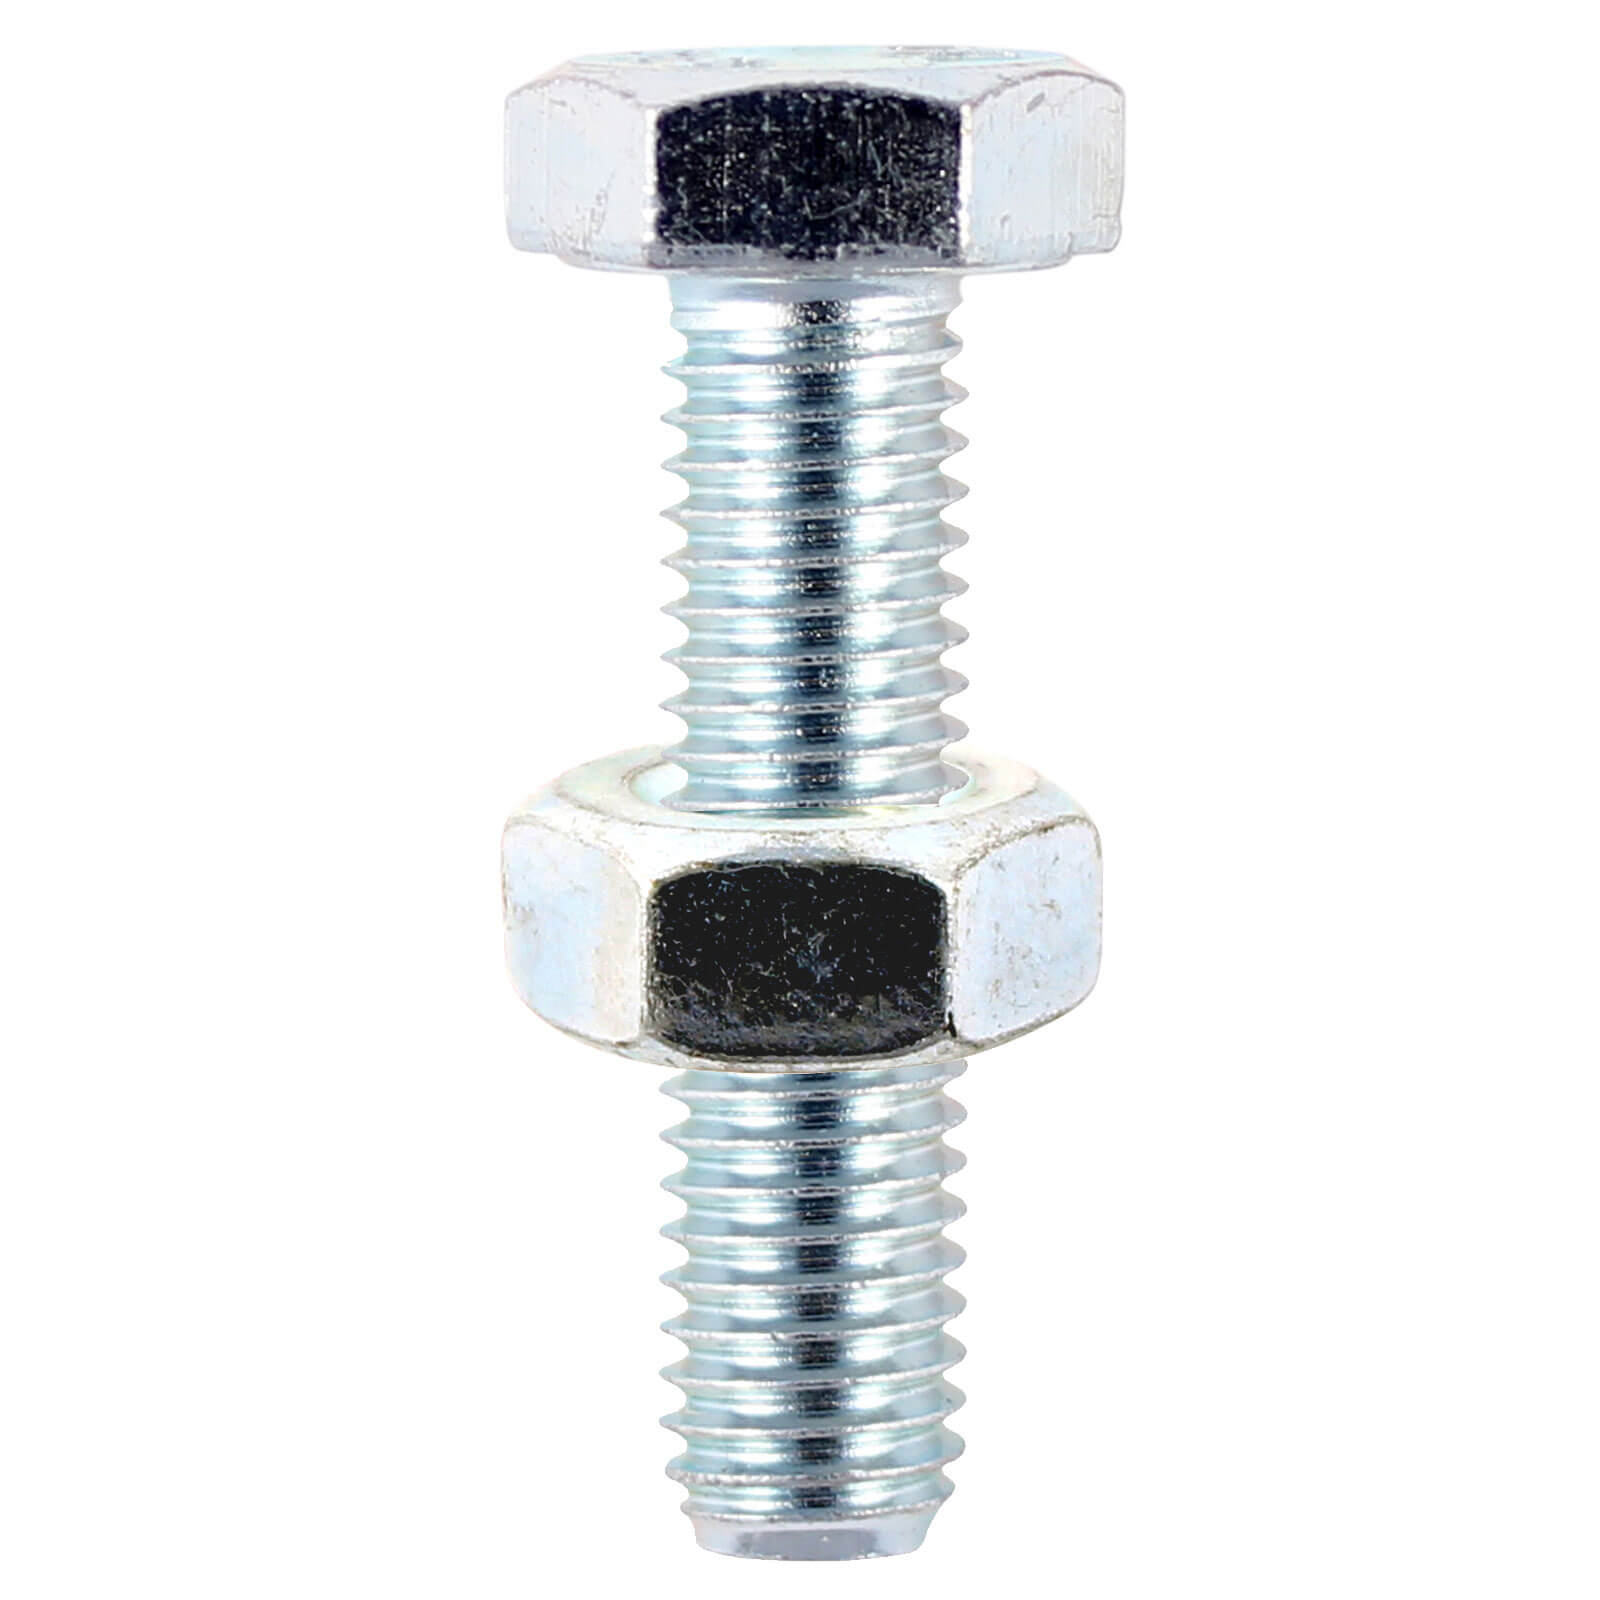 Hexagon Set Screw and Nuts Stainless Steel M10 50mm Pack of 2